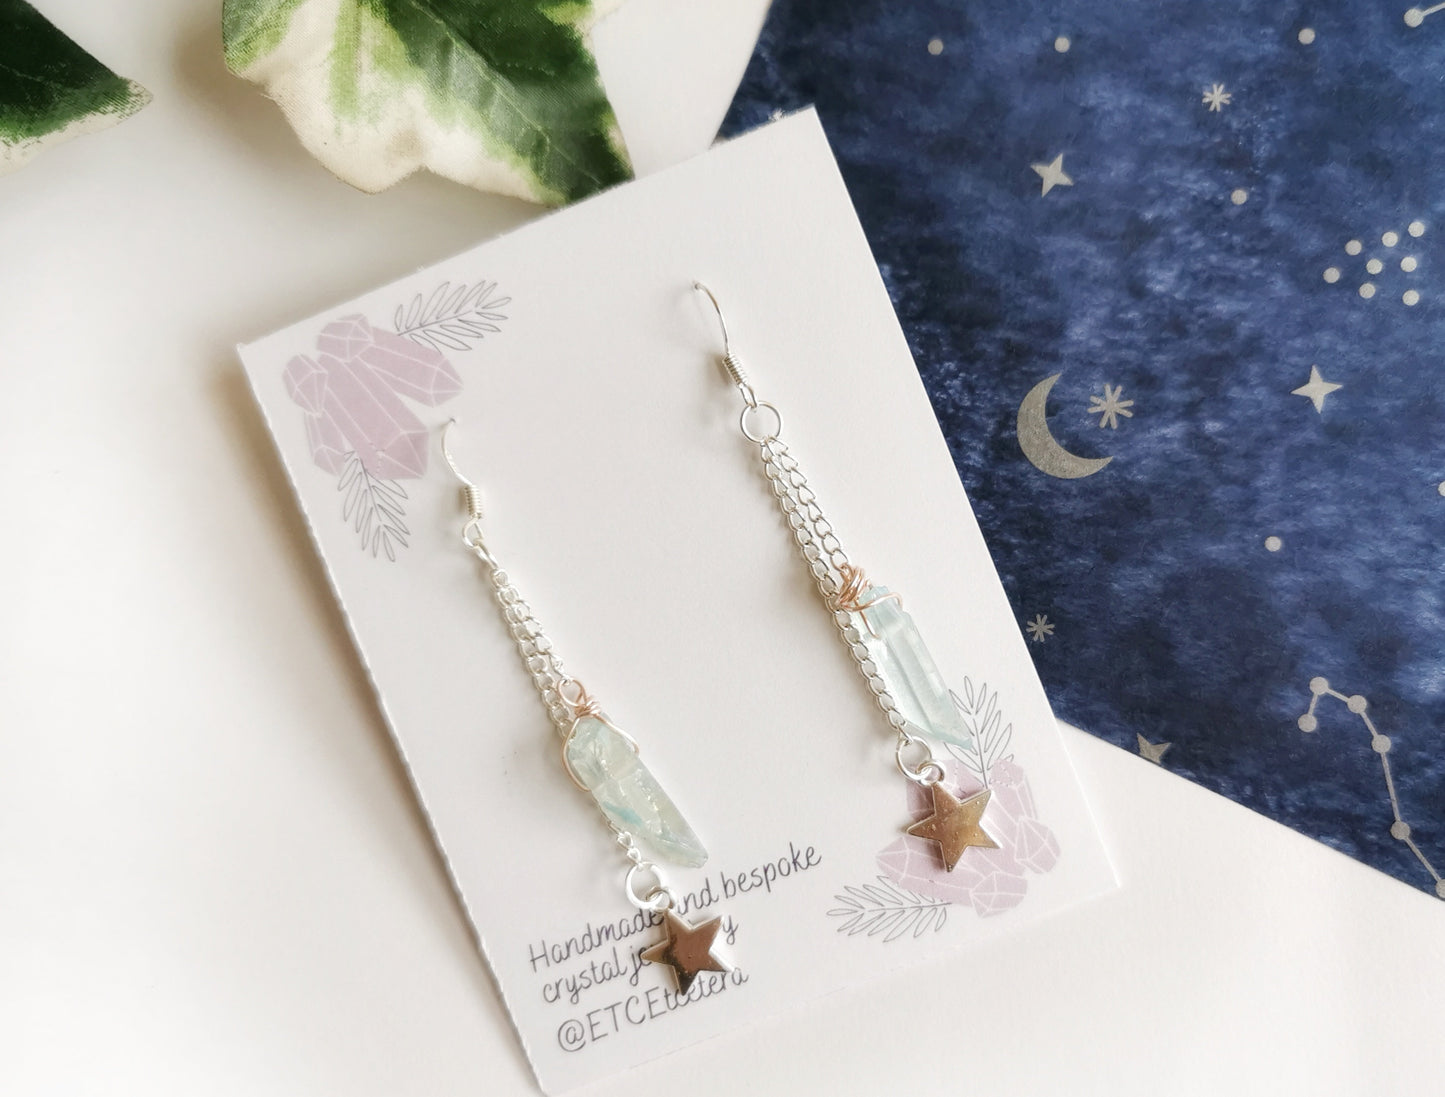 Star and Crystal Earrings